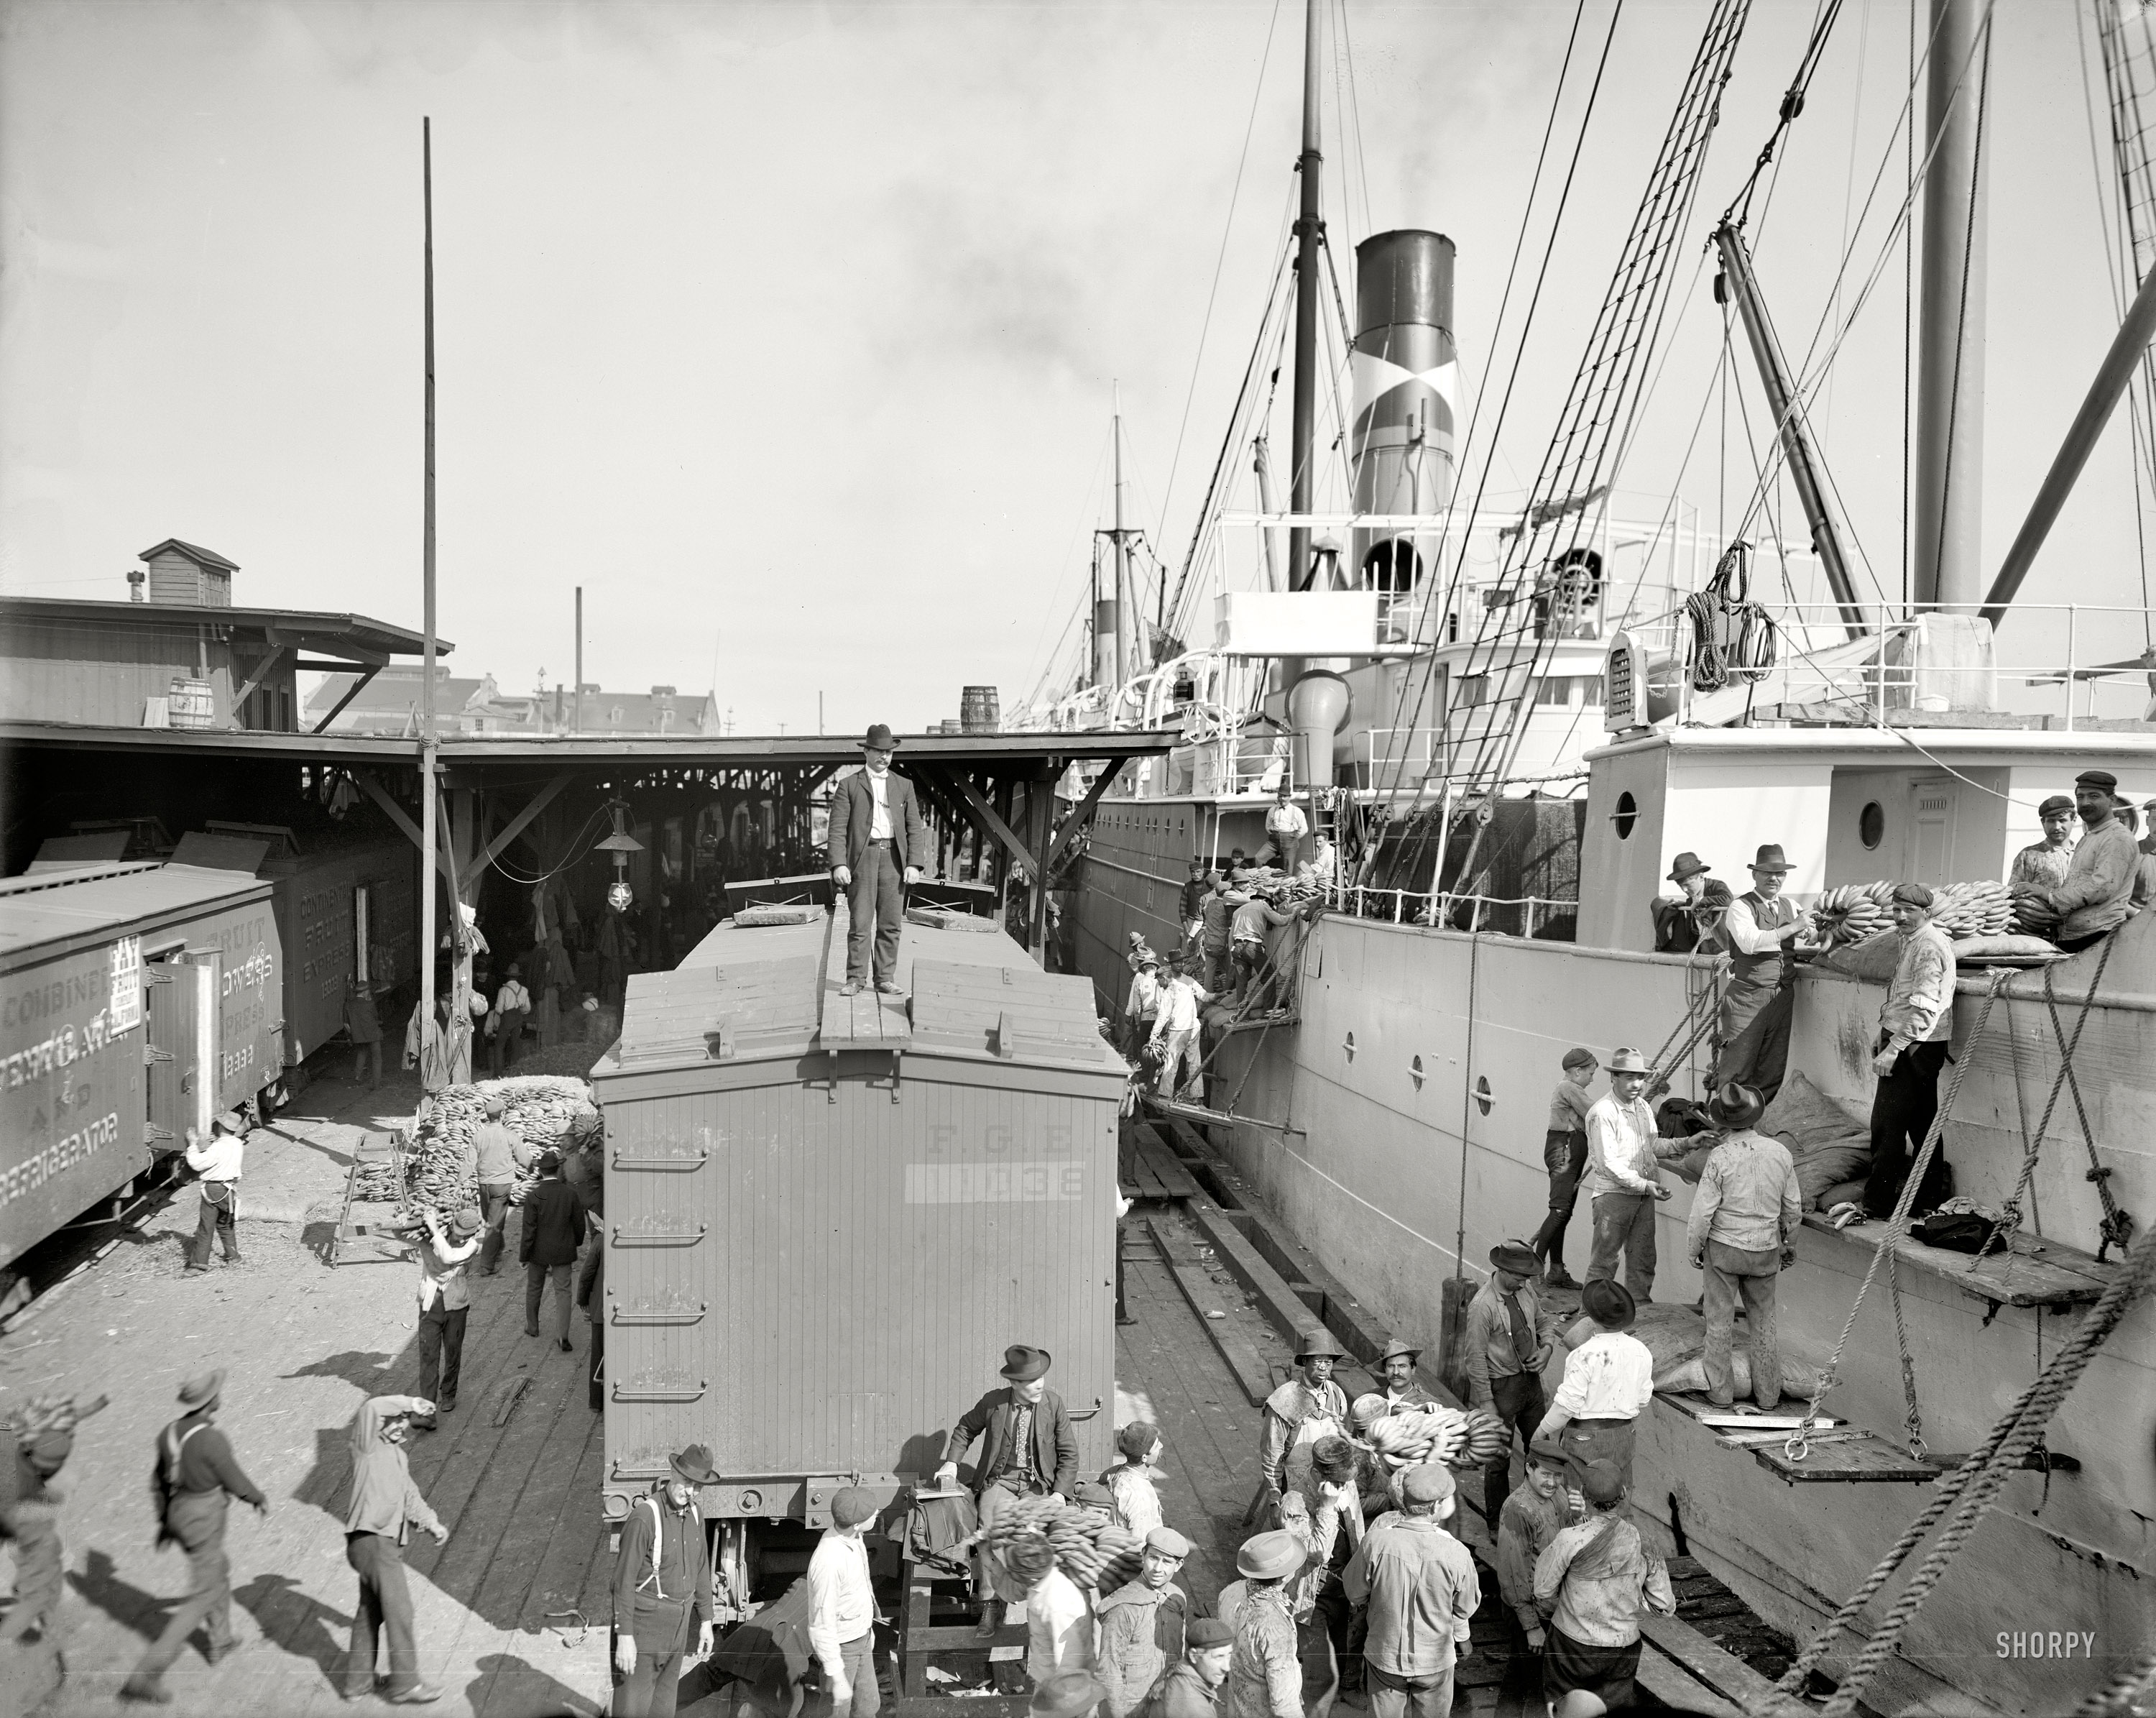 Circa 1903. "Unloading bananas at New Orleans." Come Mr. Tally Man! 8x10 inch dry plate glass negative, Detroit Publishing Company. View full size.